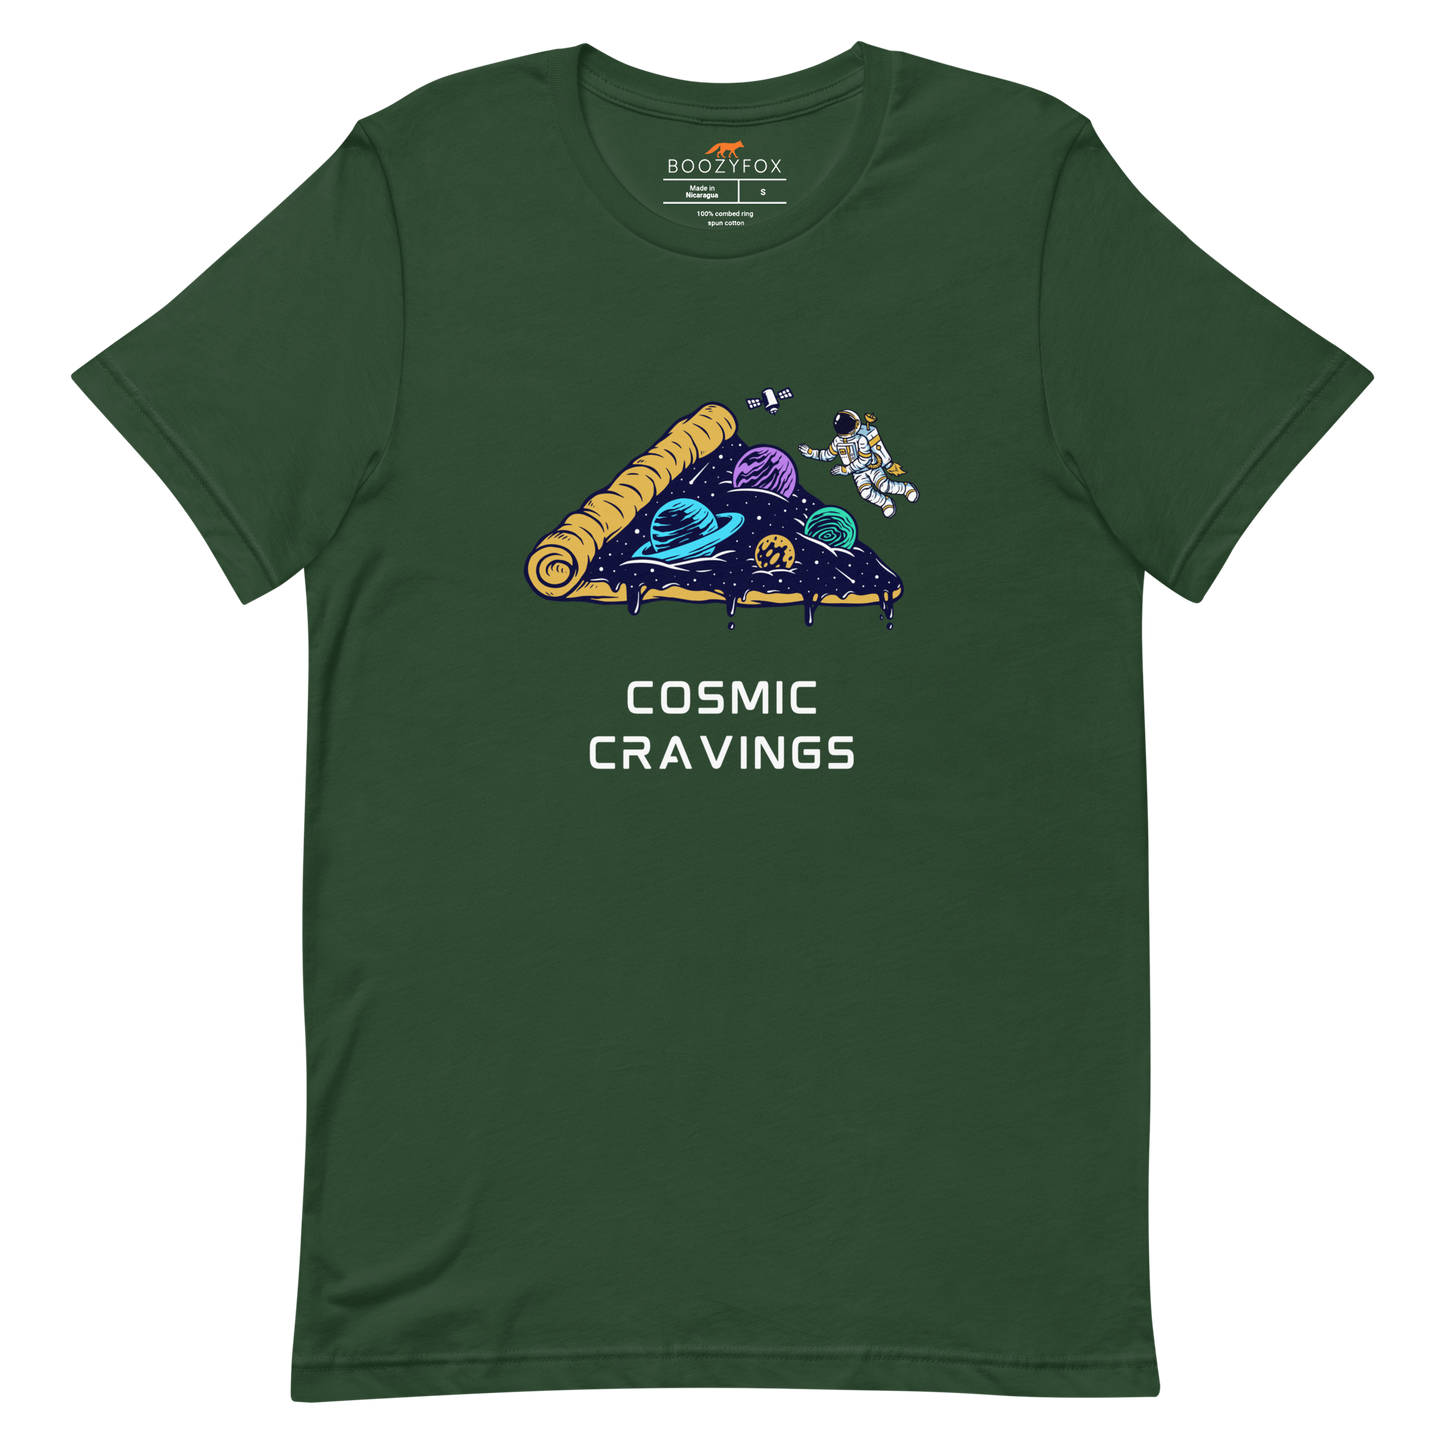 Forest Green Premium Cosmic Cravings Tee featuring an Astronaut Exploring a Pizza Universe graphic on the chest - Funny Graphic Space Tees - Boozy Fox